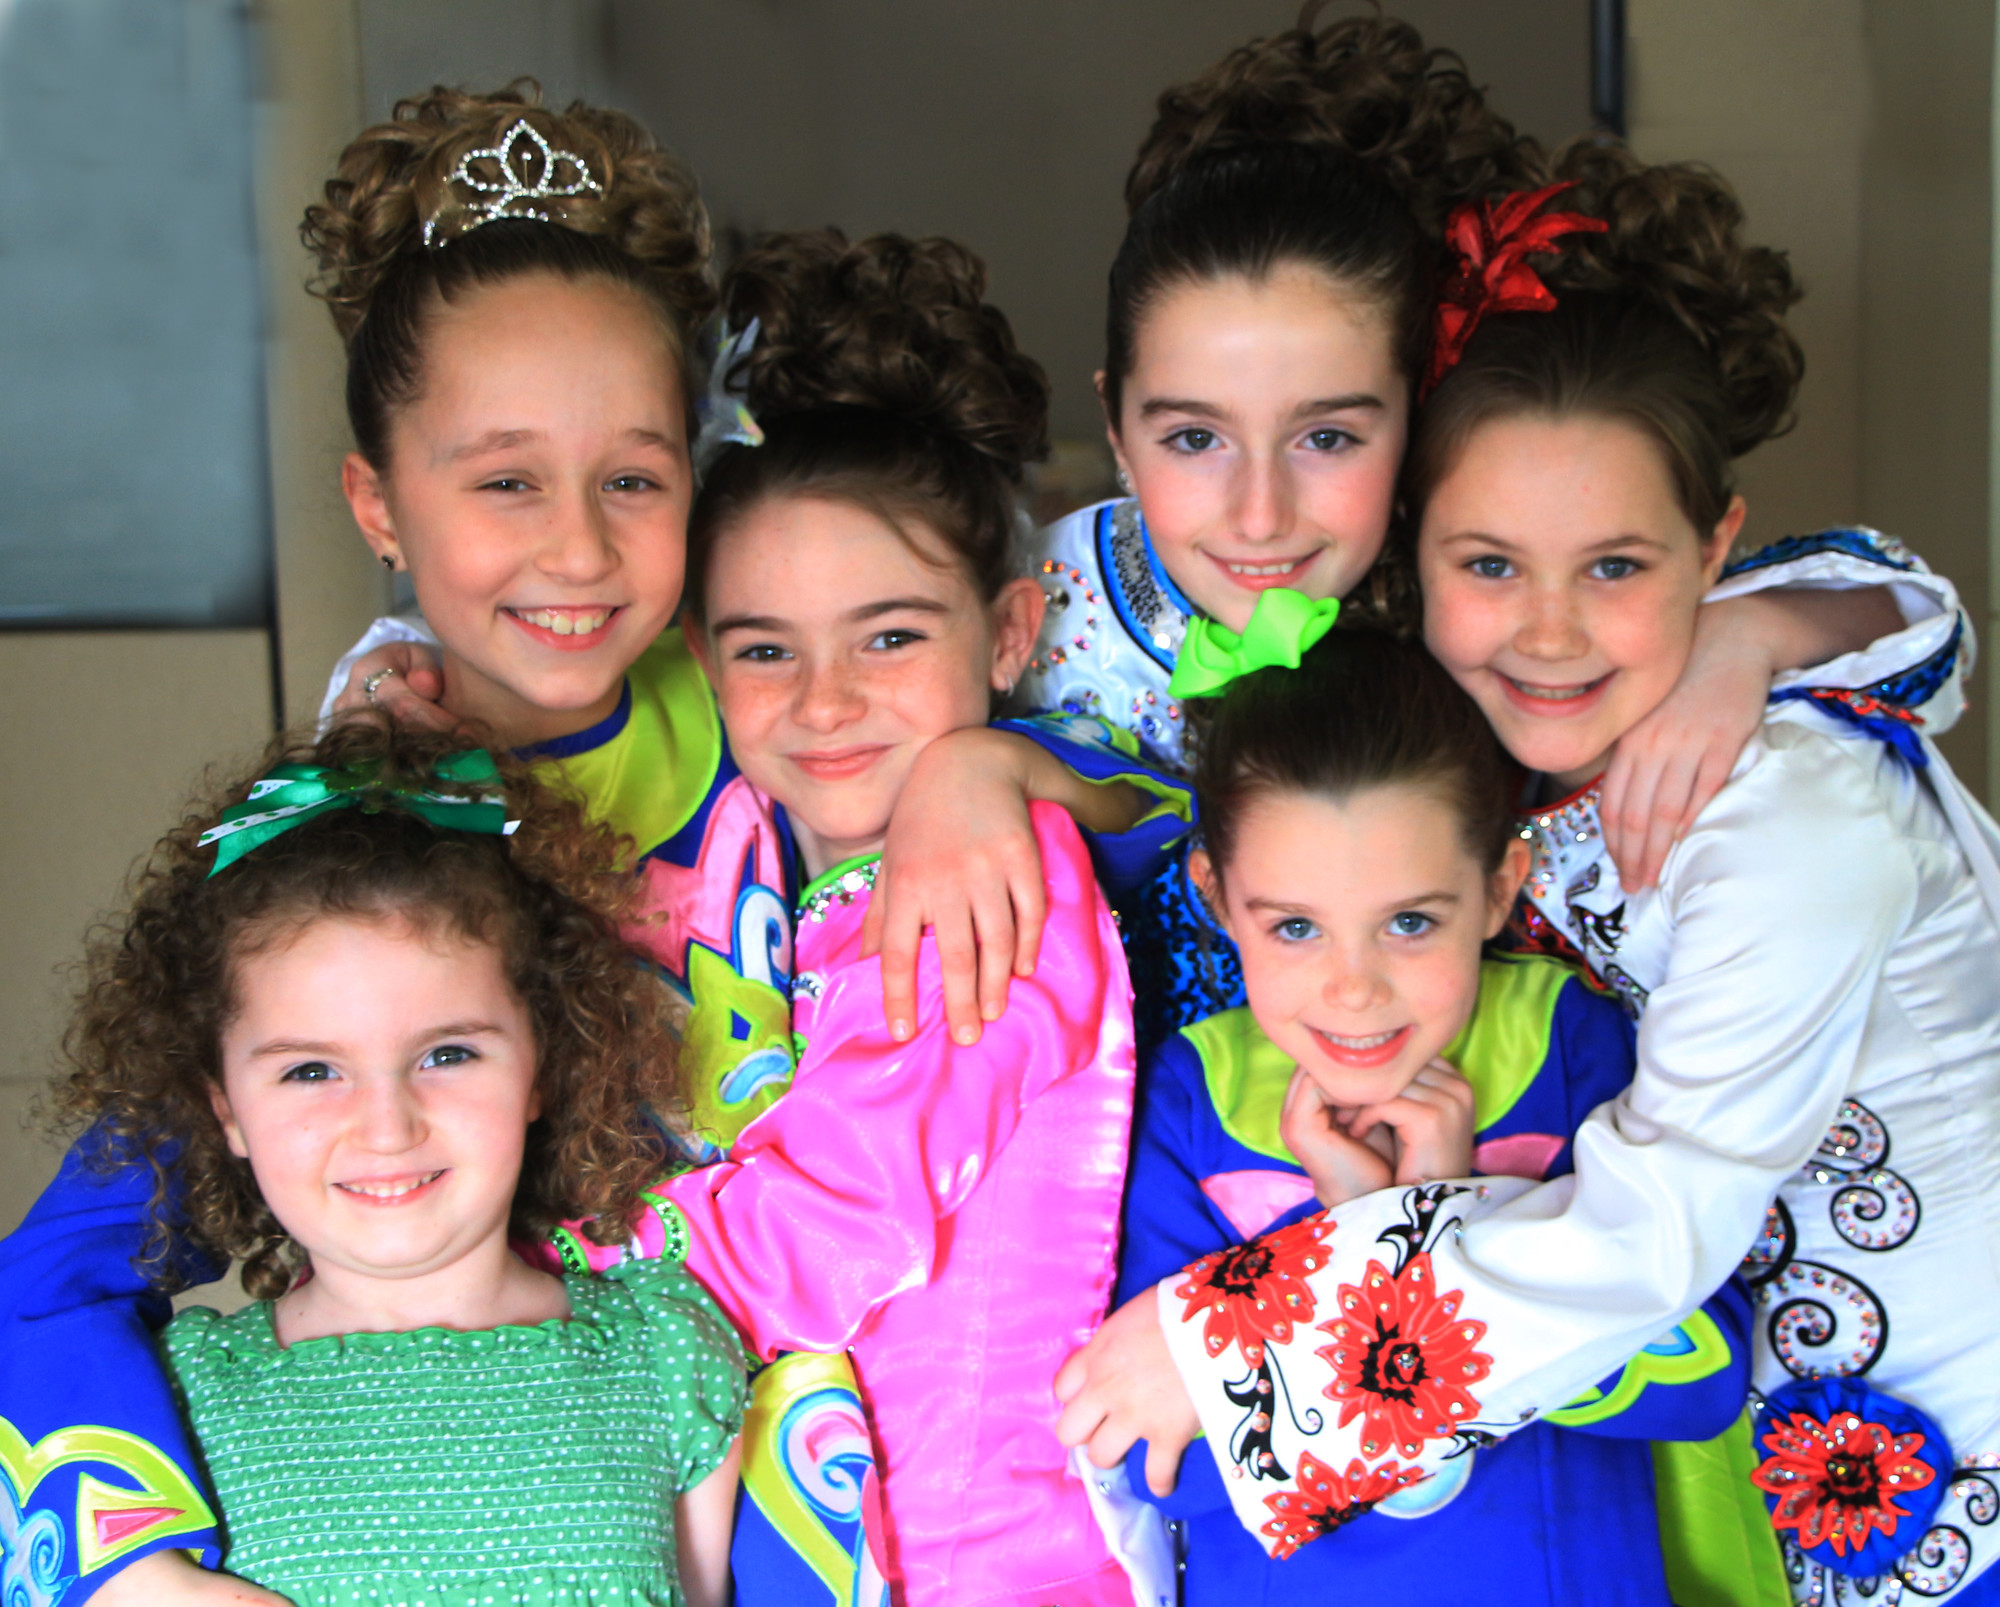 Irish step dancers, from left, Claire Barrins, 4, Natalie Paul, 8, Brigid Mahoney, 8, Maggie Nesturrick, 6, Sophie Nesturrick, 9, and Maeve Barrins, 9, performed in front of a big crowd at Sonny’s.